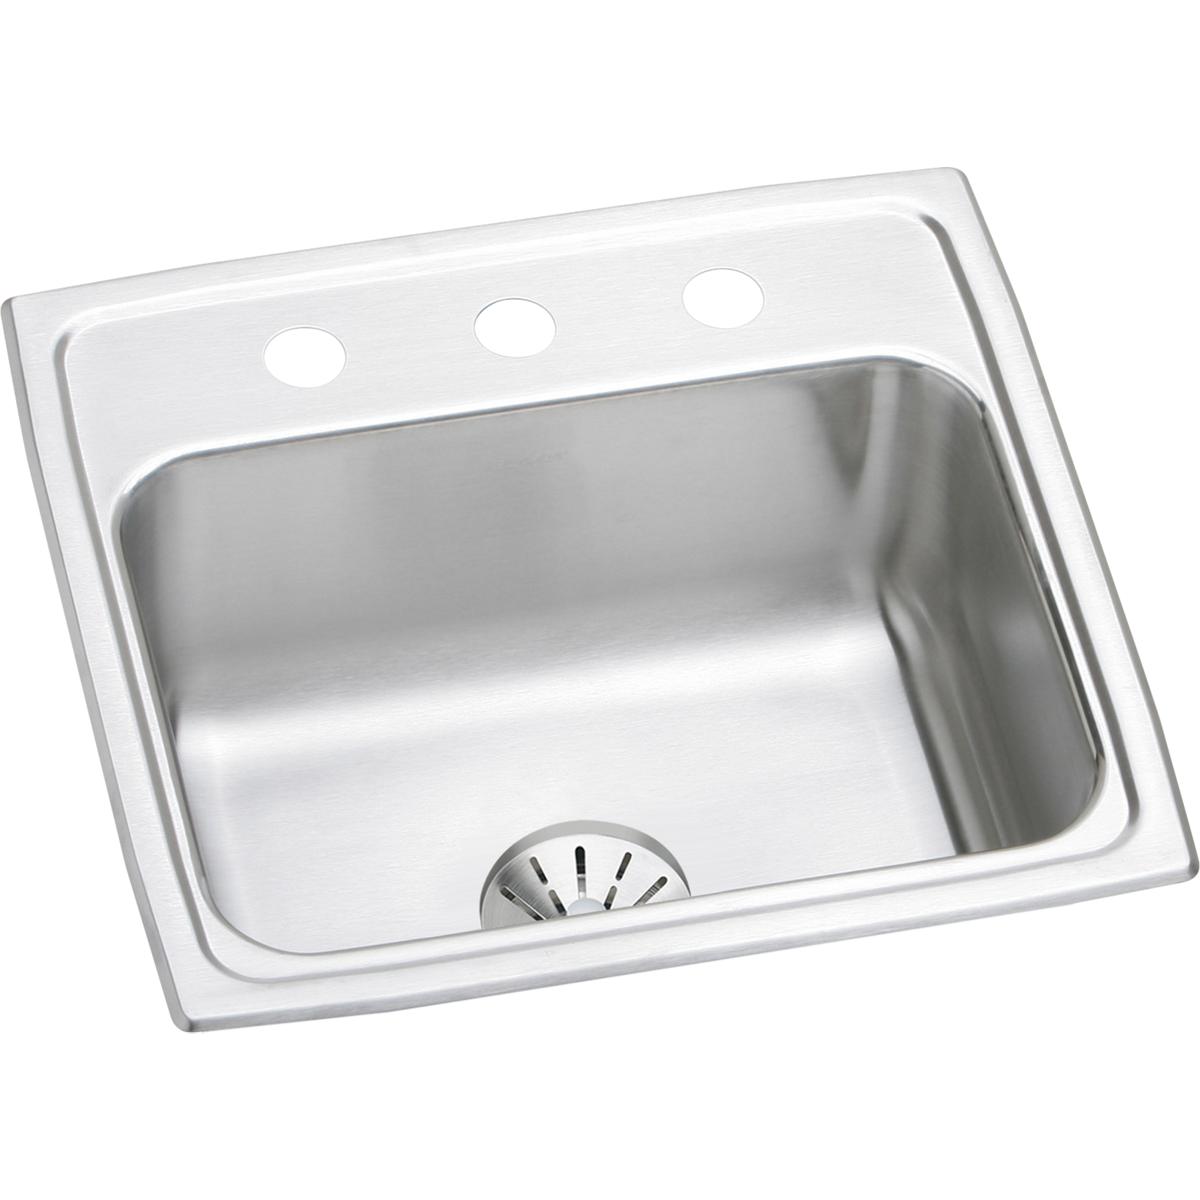 Elkay Lustertone Classic 19-1/2" x 19" x 7-1/2" Single Bowl Drop-in Stainless Steel Sink with Perfect Drain